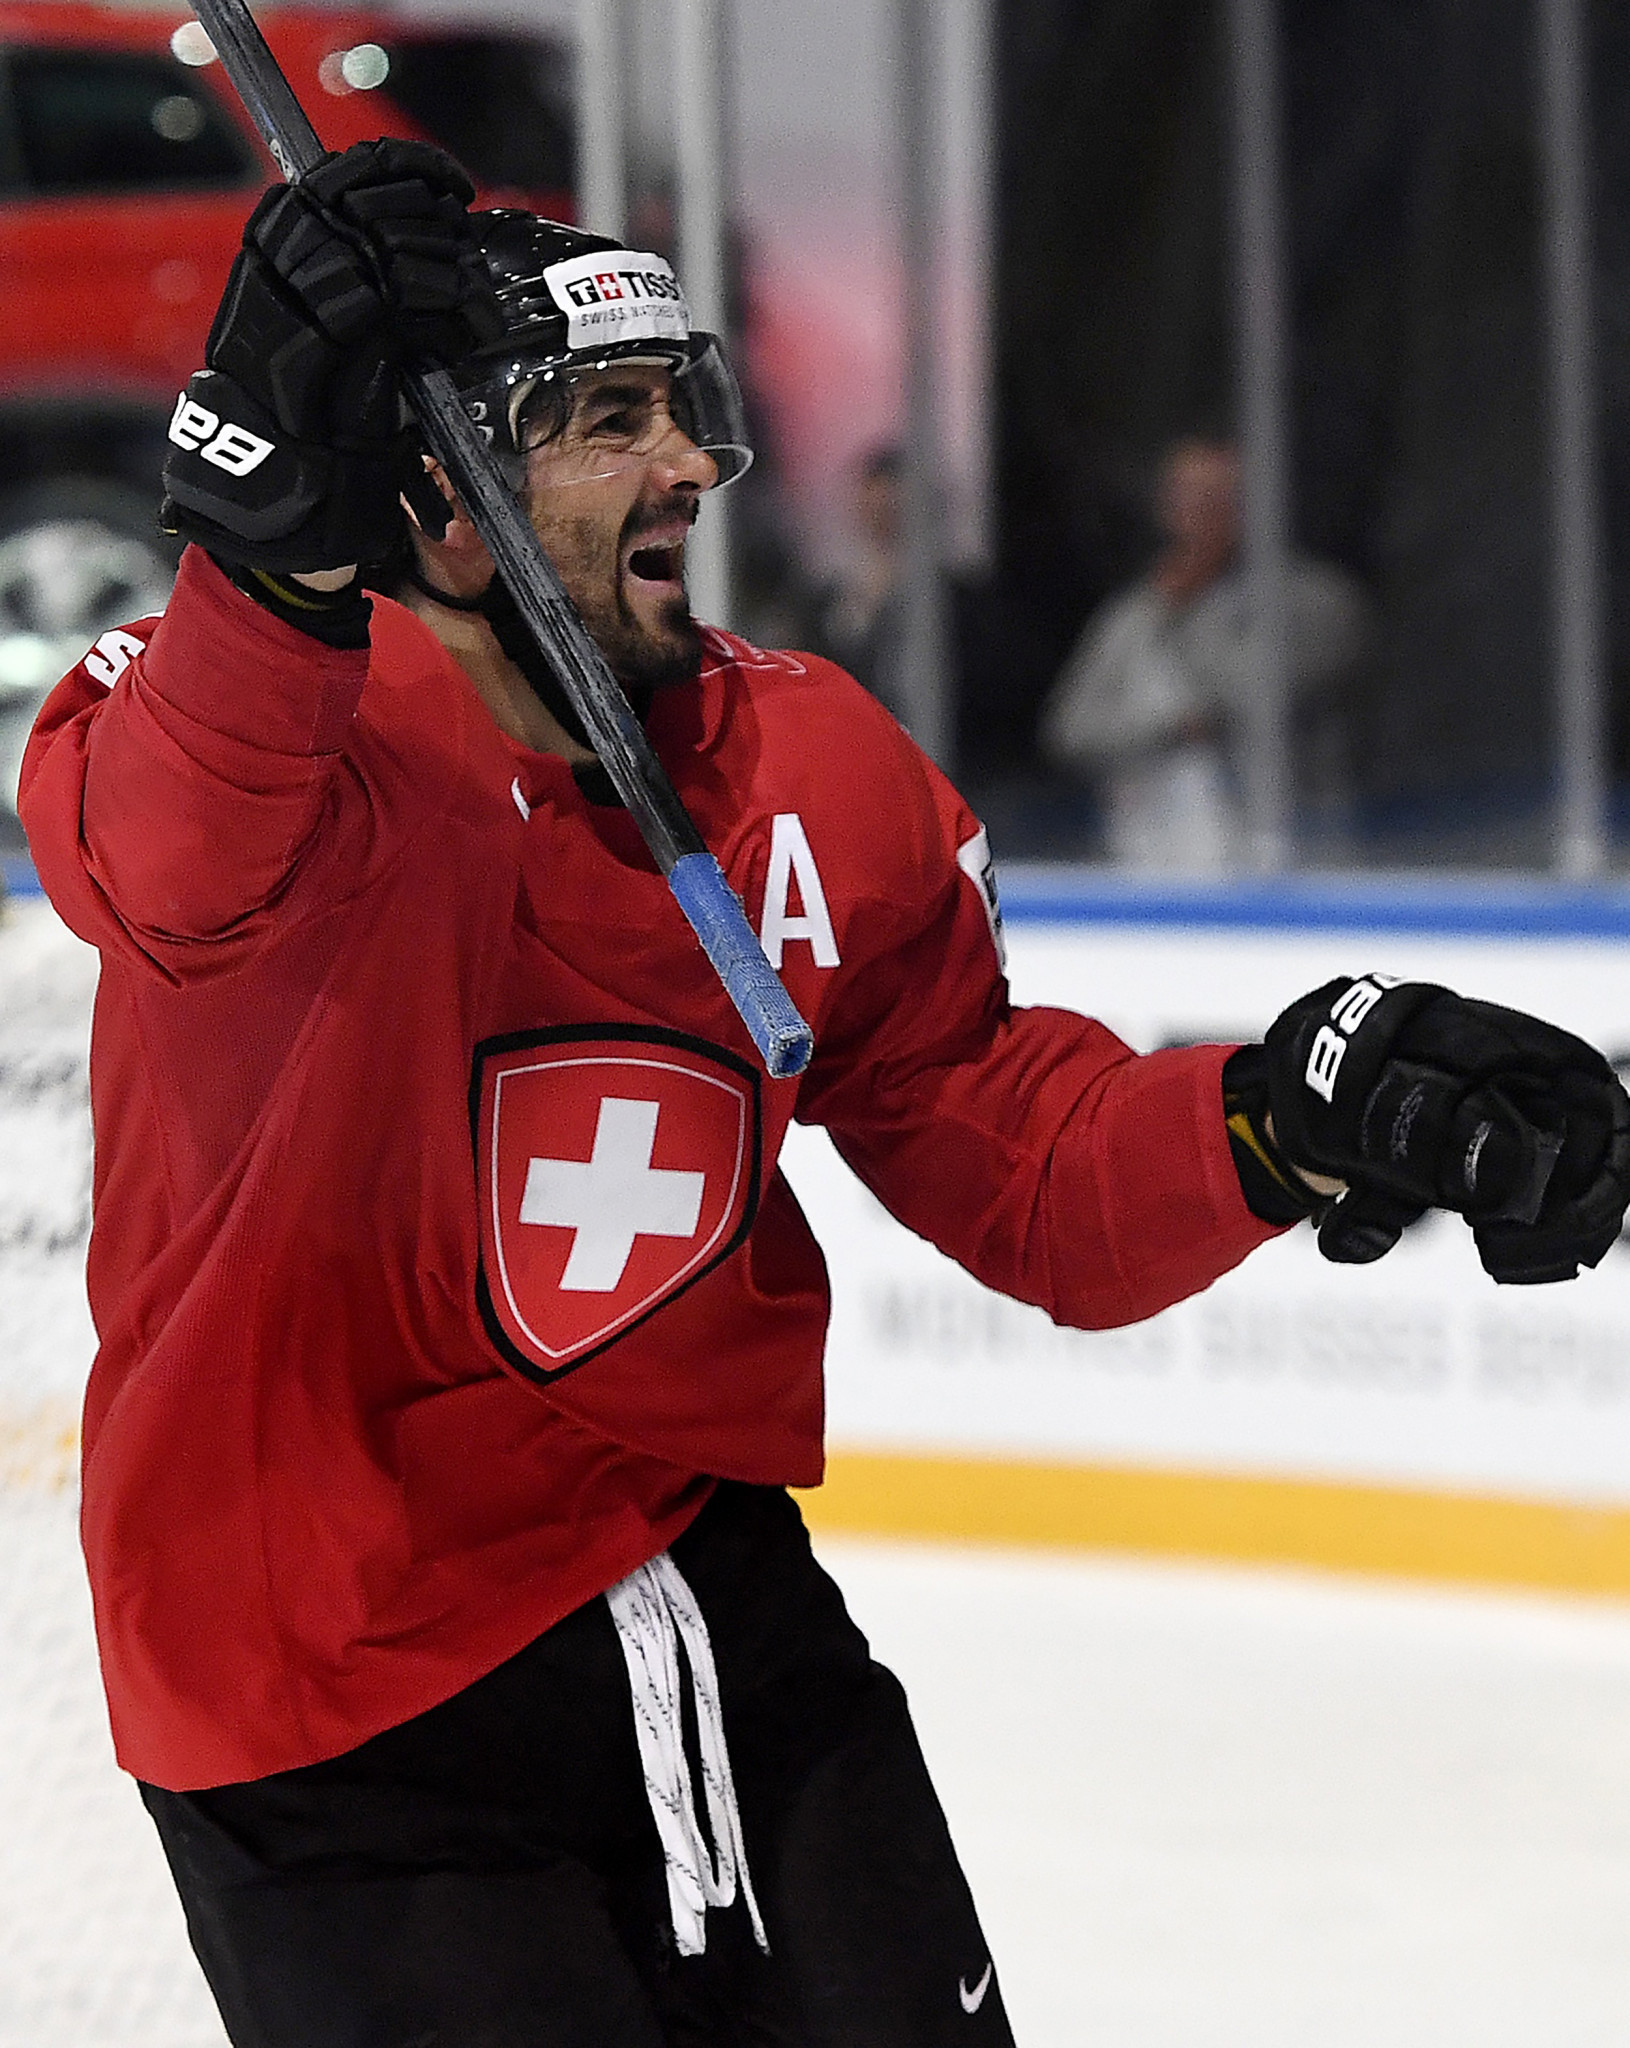 Switzerland pick Pyeongchang 2018 ice hockey squads and confirm Ammann for sixth Games